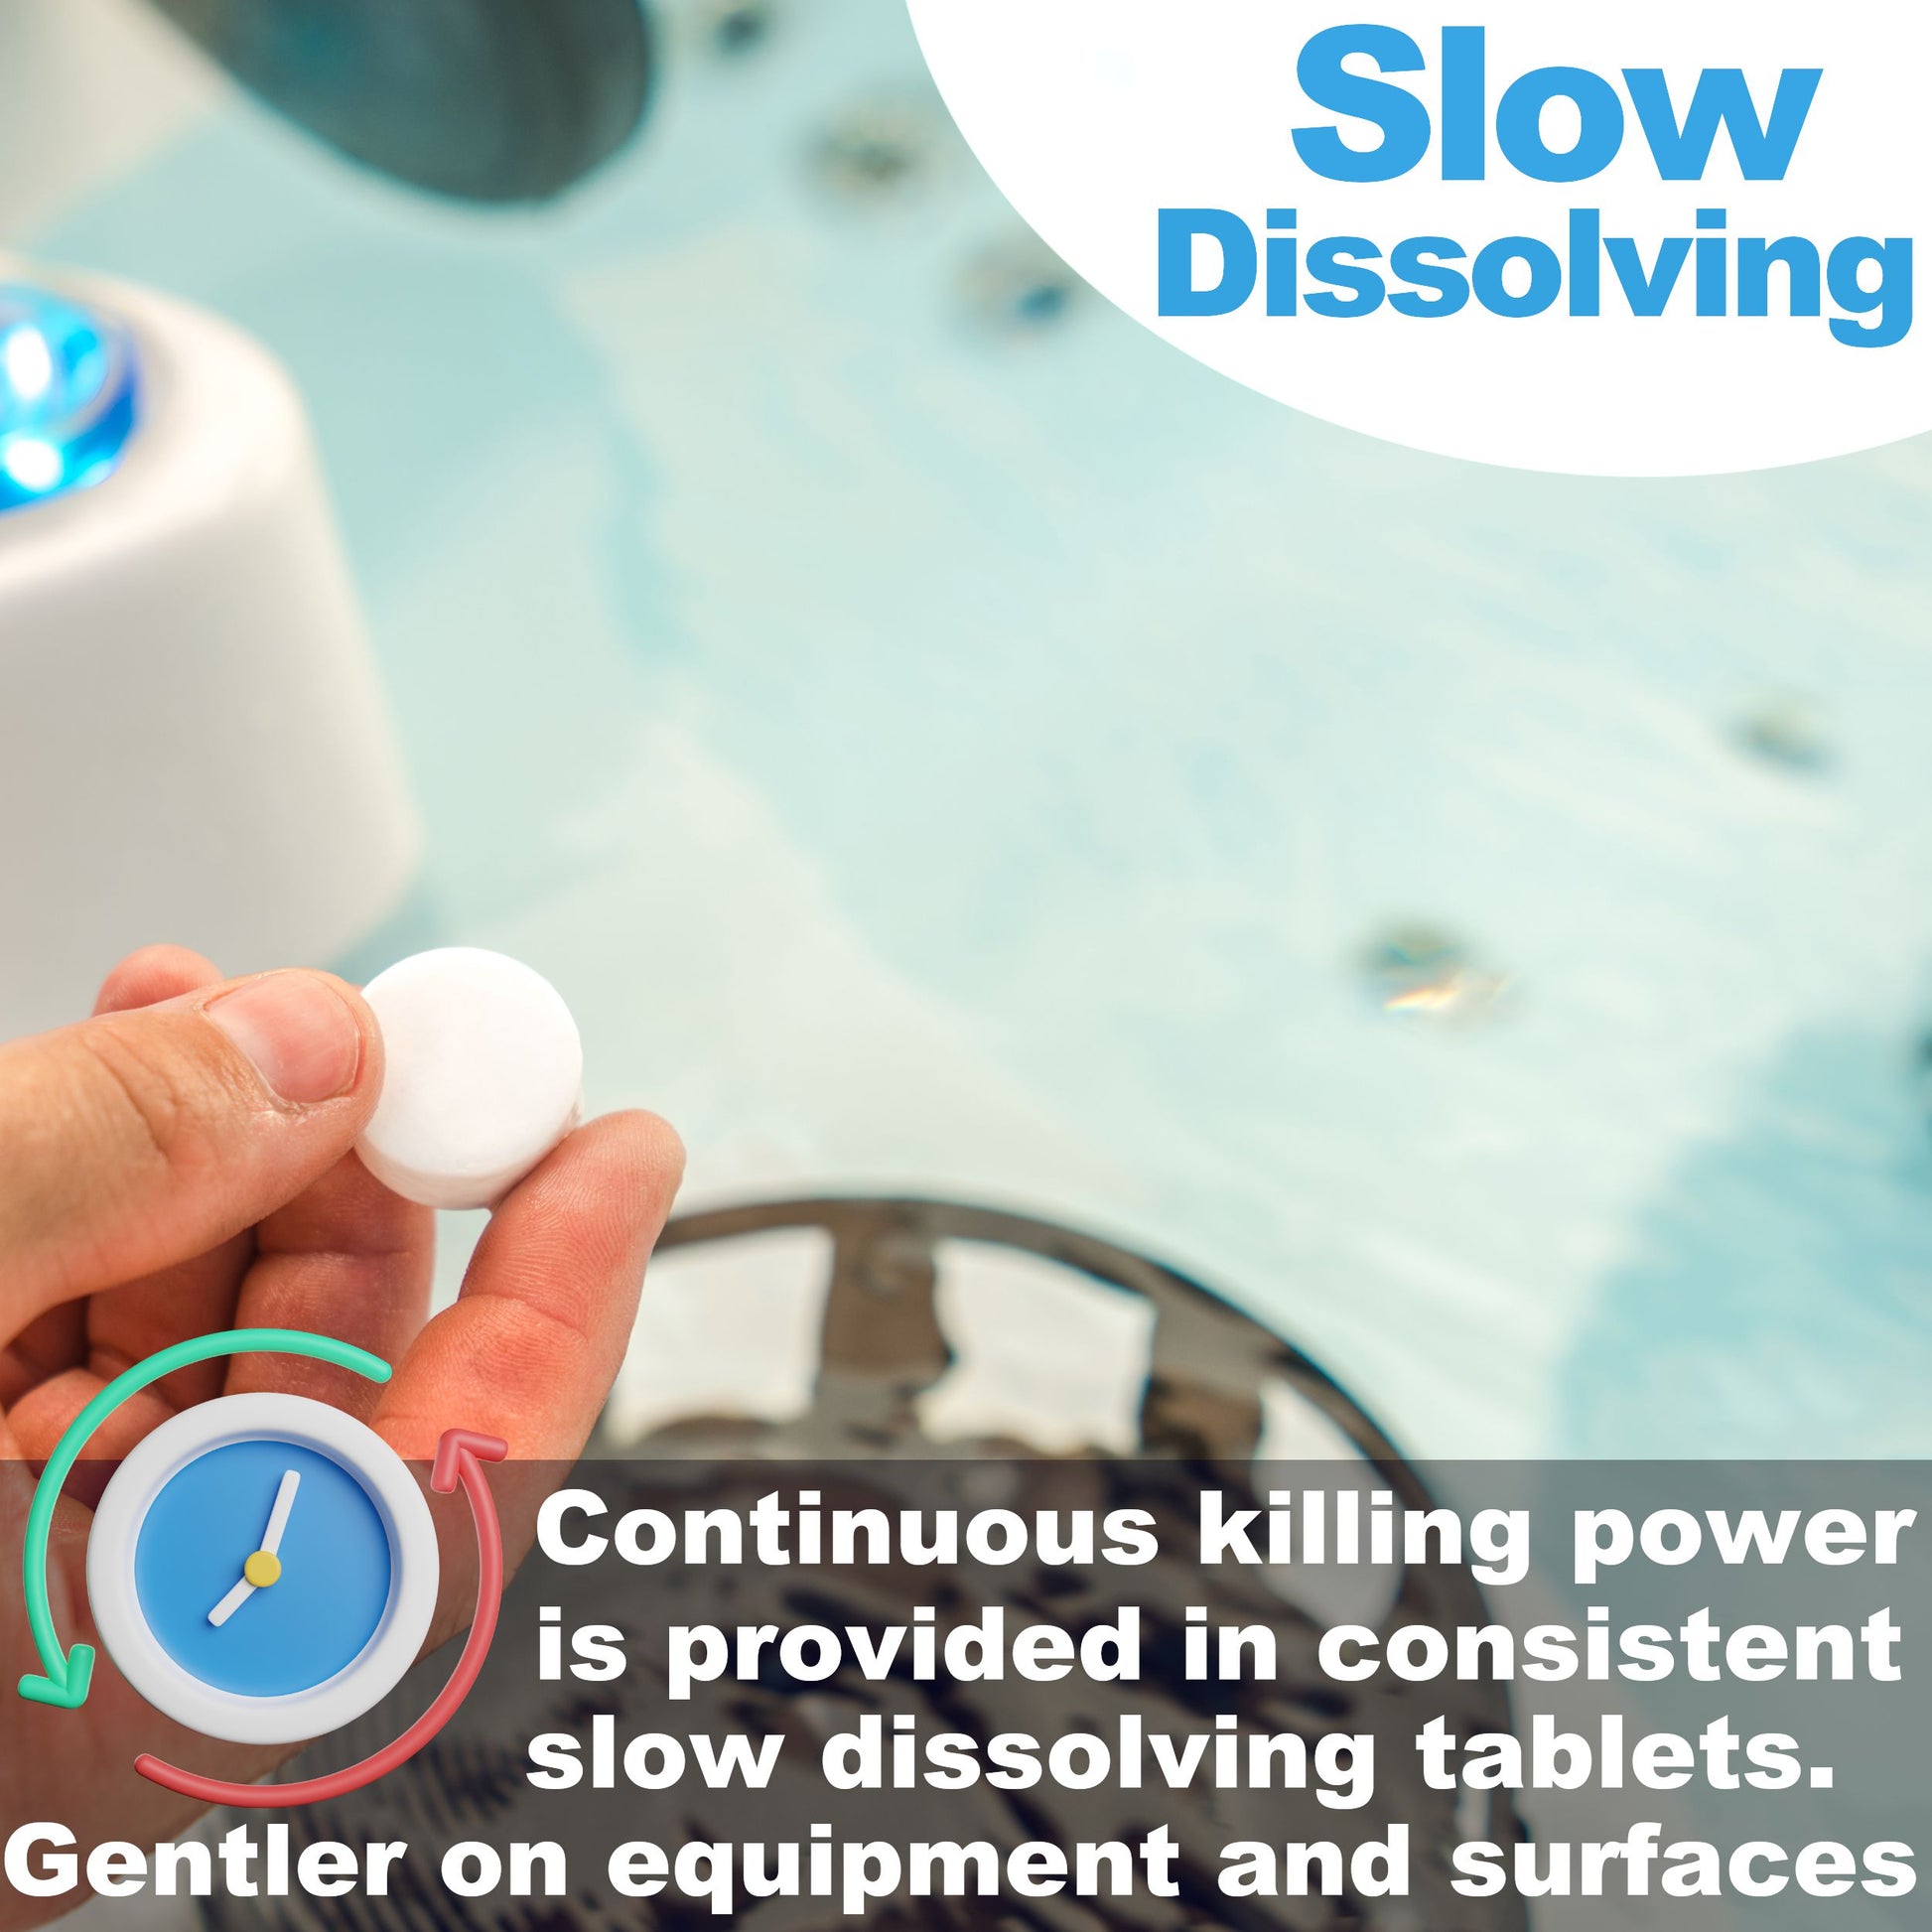 Slow dissolving - 10 lbs 1 Inch Bromine Tablets for Hot Tubs Pool Spas